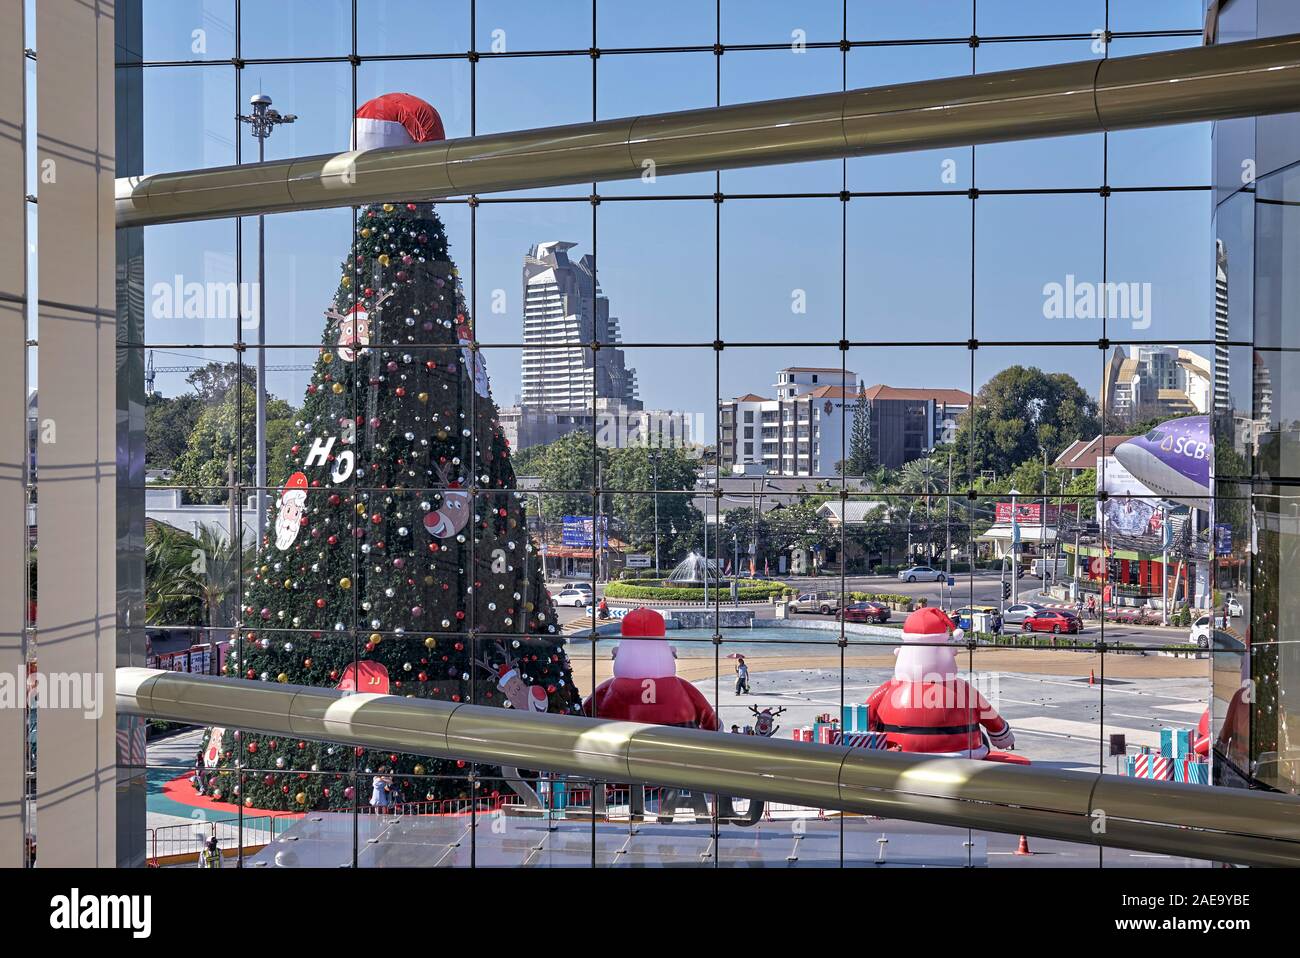 Through a window. View through window of Pattaya City, and Christmas decorations, Thailand, Southeast Asia Stock Photo